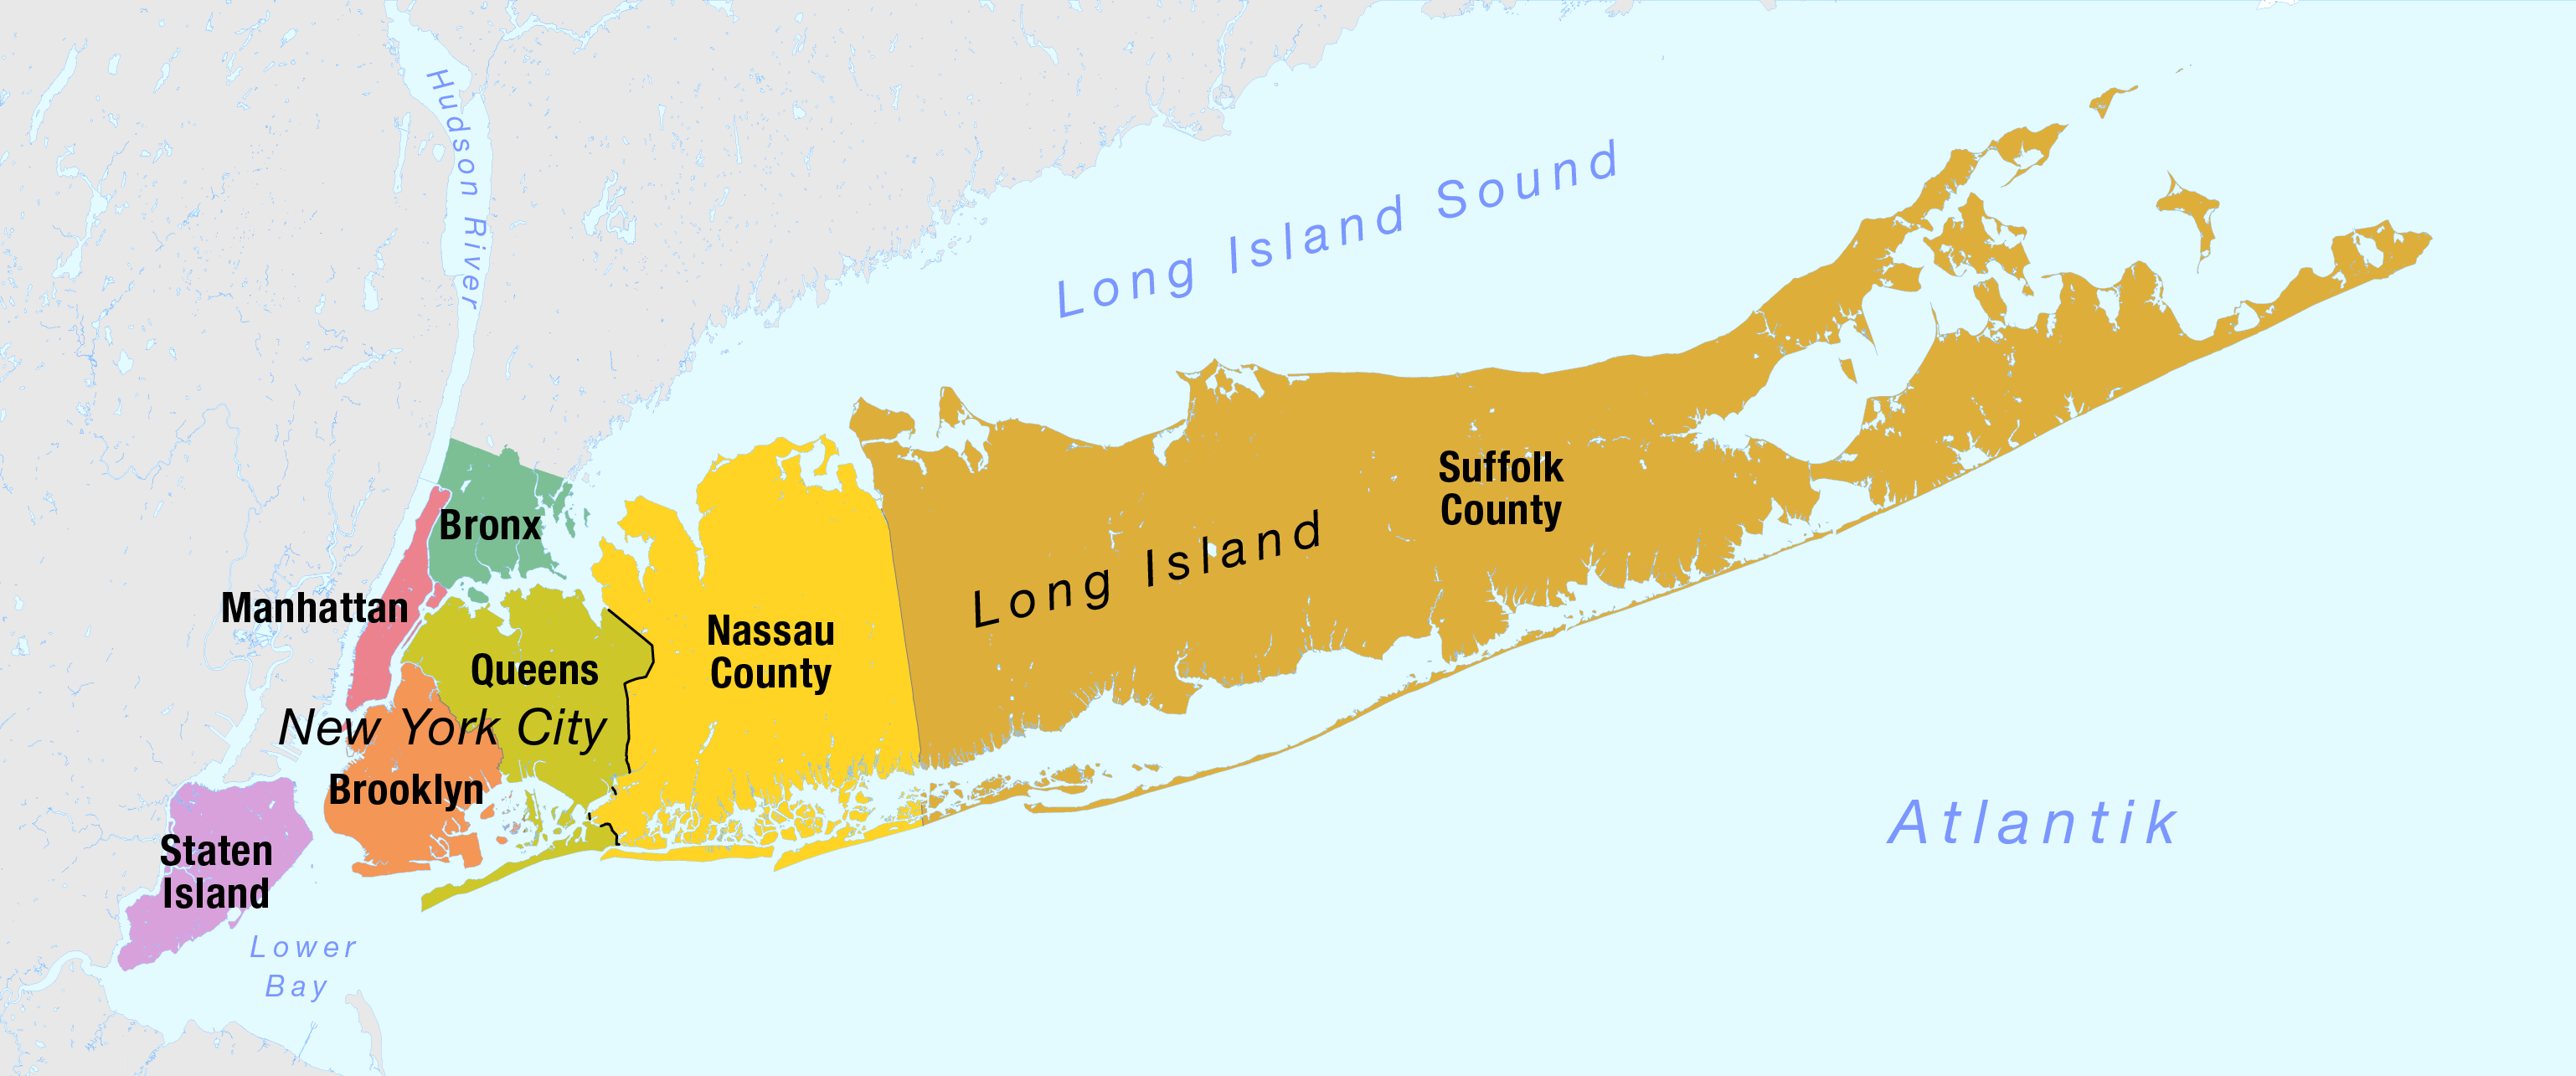 Map Of The Boroughs Of New York City And The Counties Of Long Island 